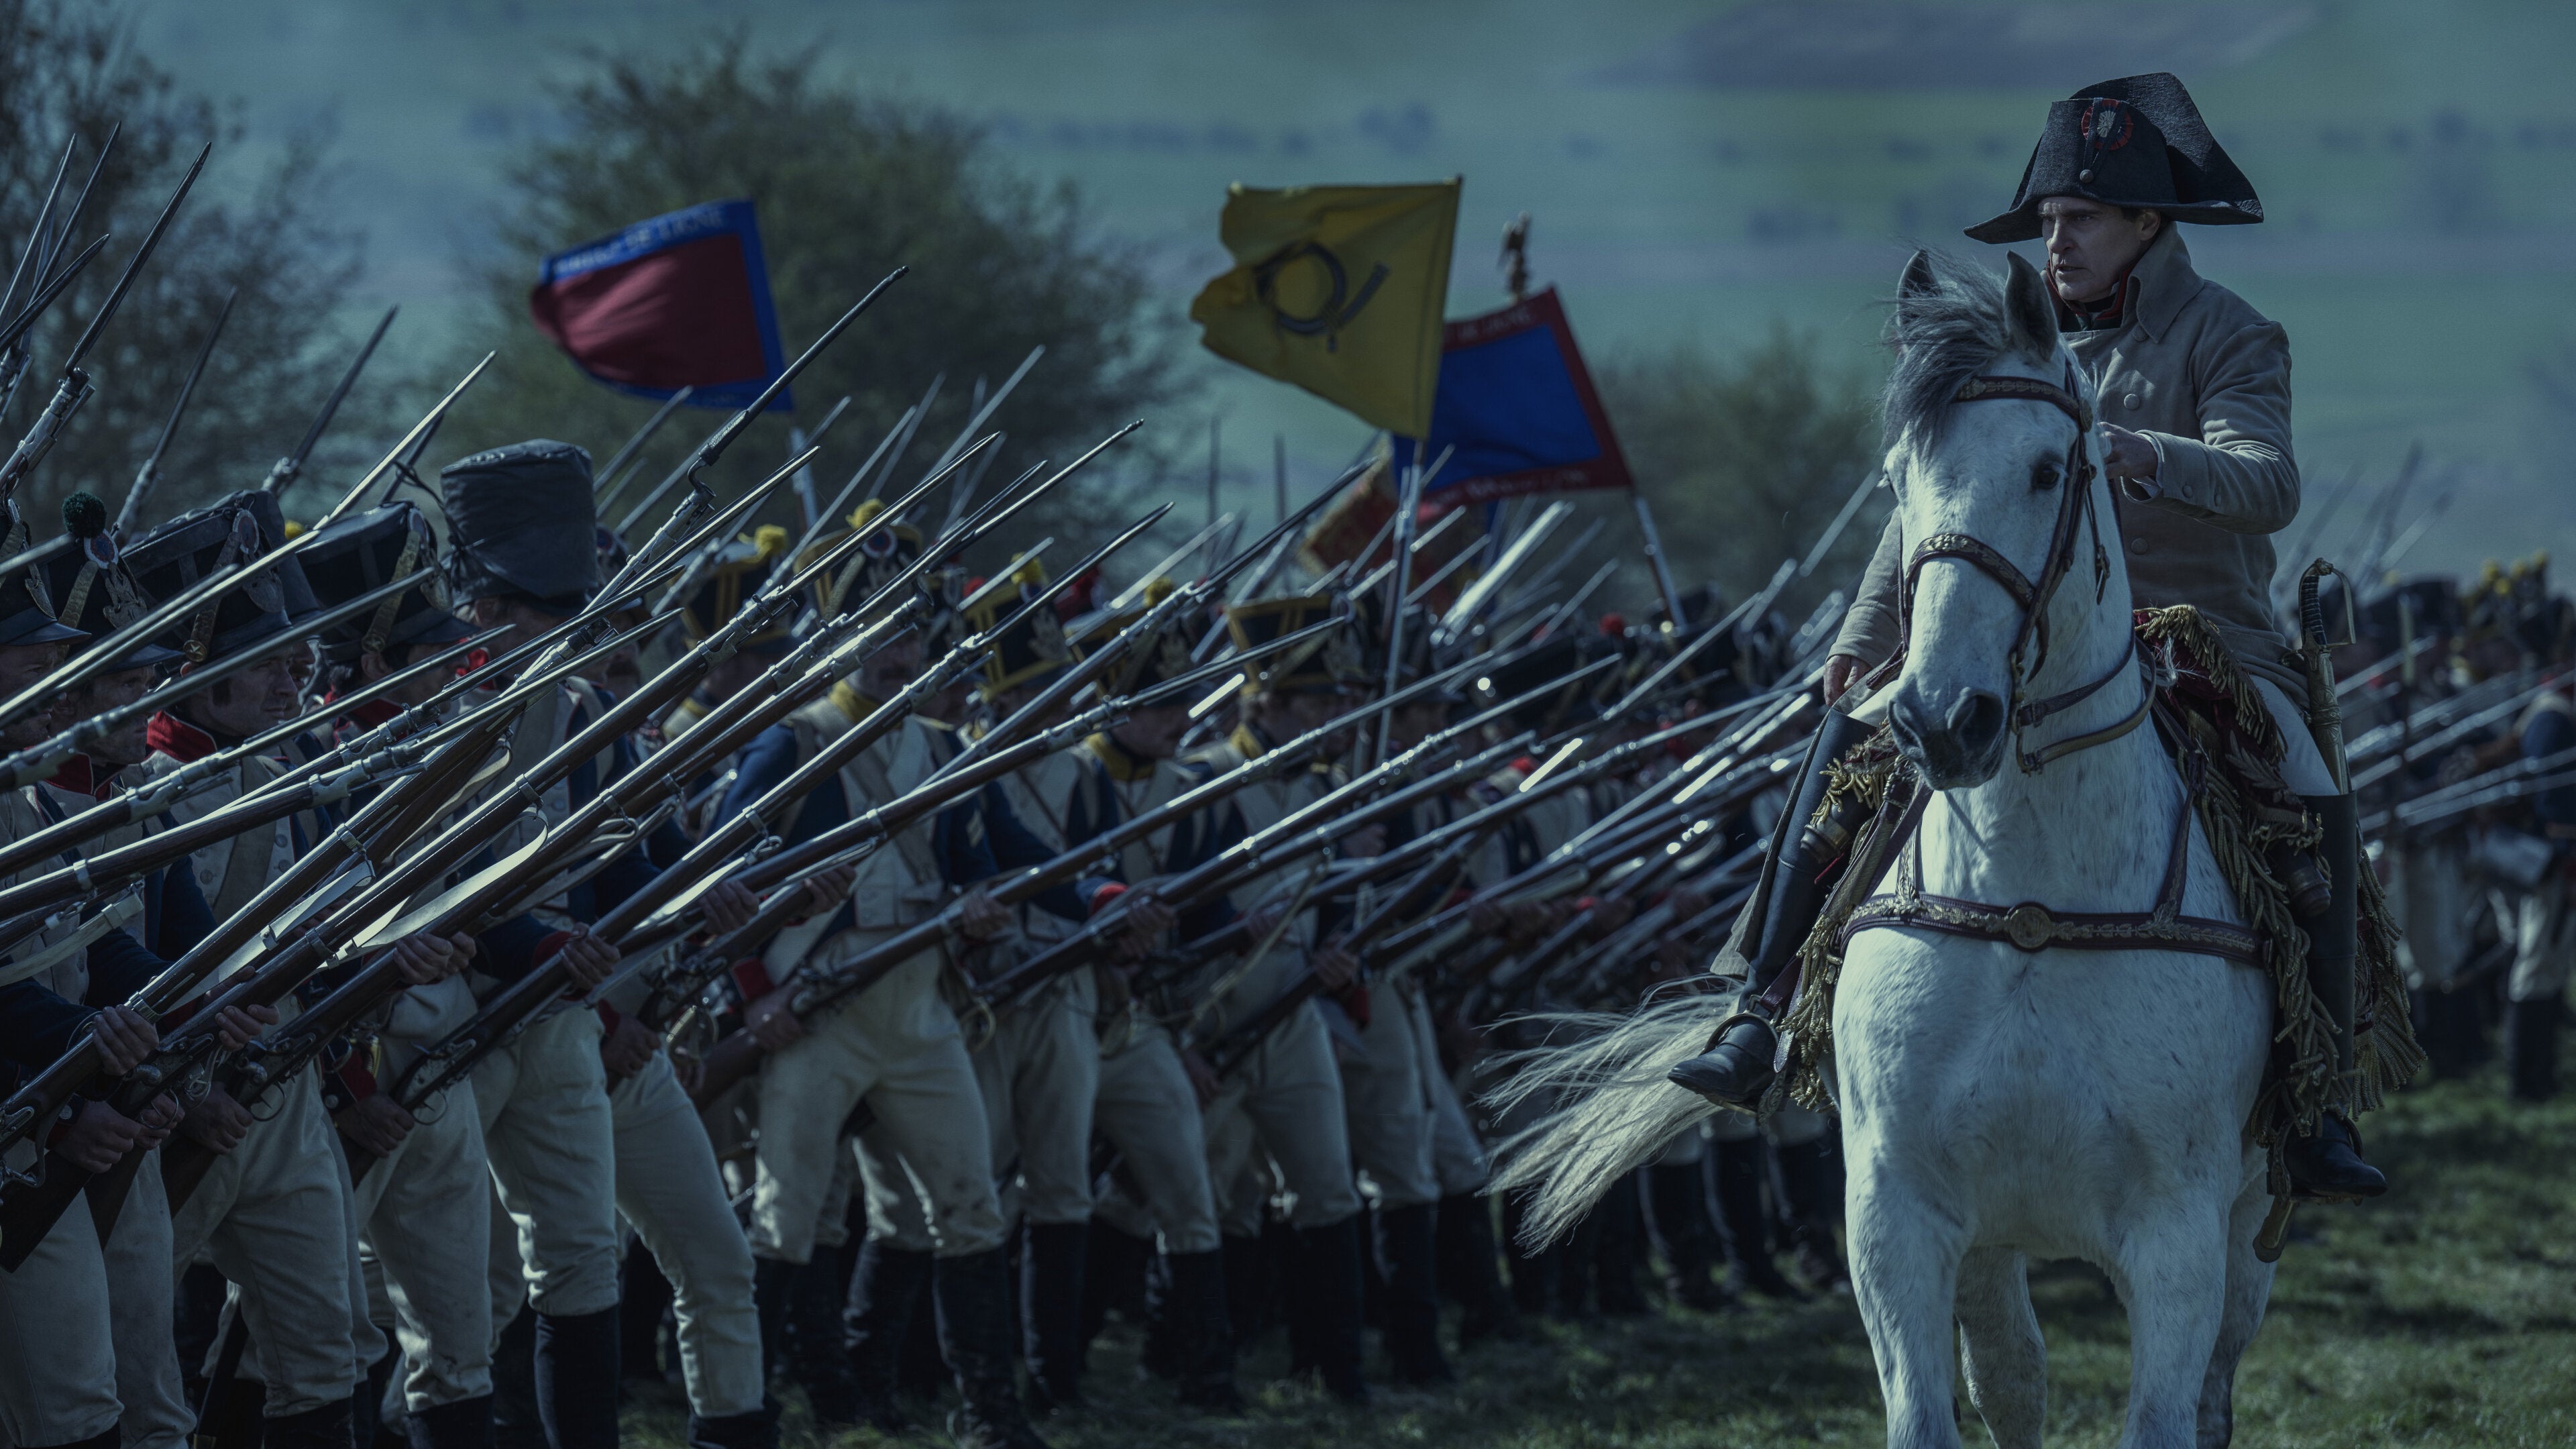 A still from Ridley Scott's "Napoleon" of Joaquin Phoenix dressed in military costume as Napoleon Bonaparte on horseback. He is commanding a large battalion of infantrymen with their bayonets in guard position.